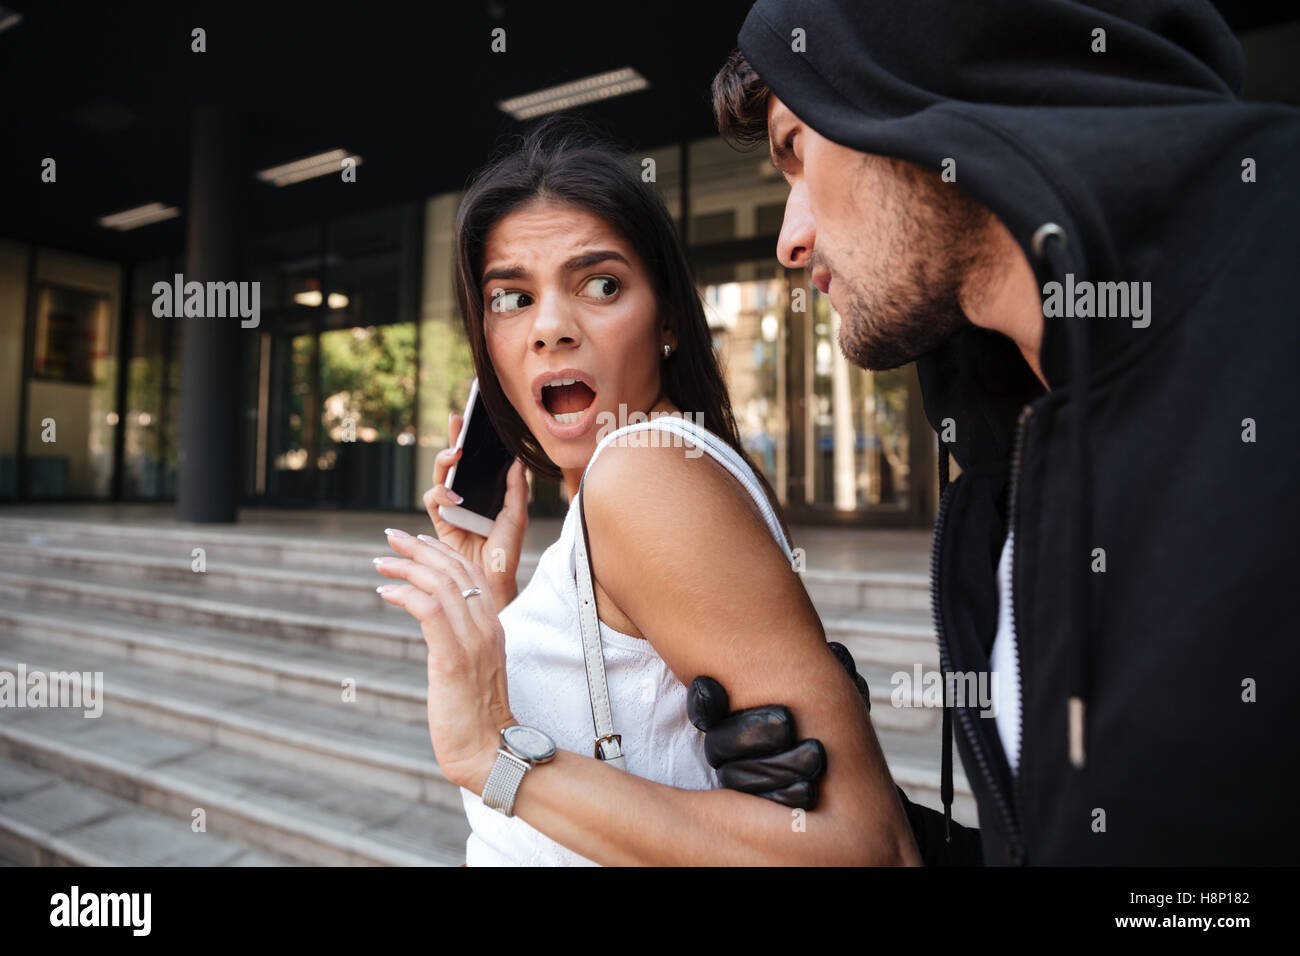 Frightened young woman with mobile phone shouting and being attacked by criminal man on the street Stock Photo